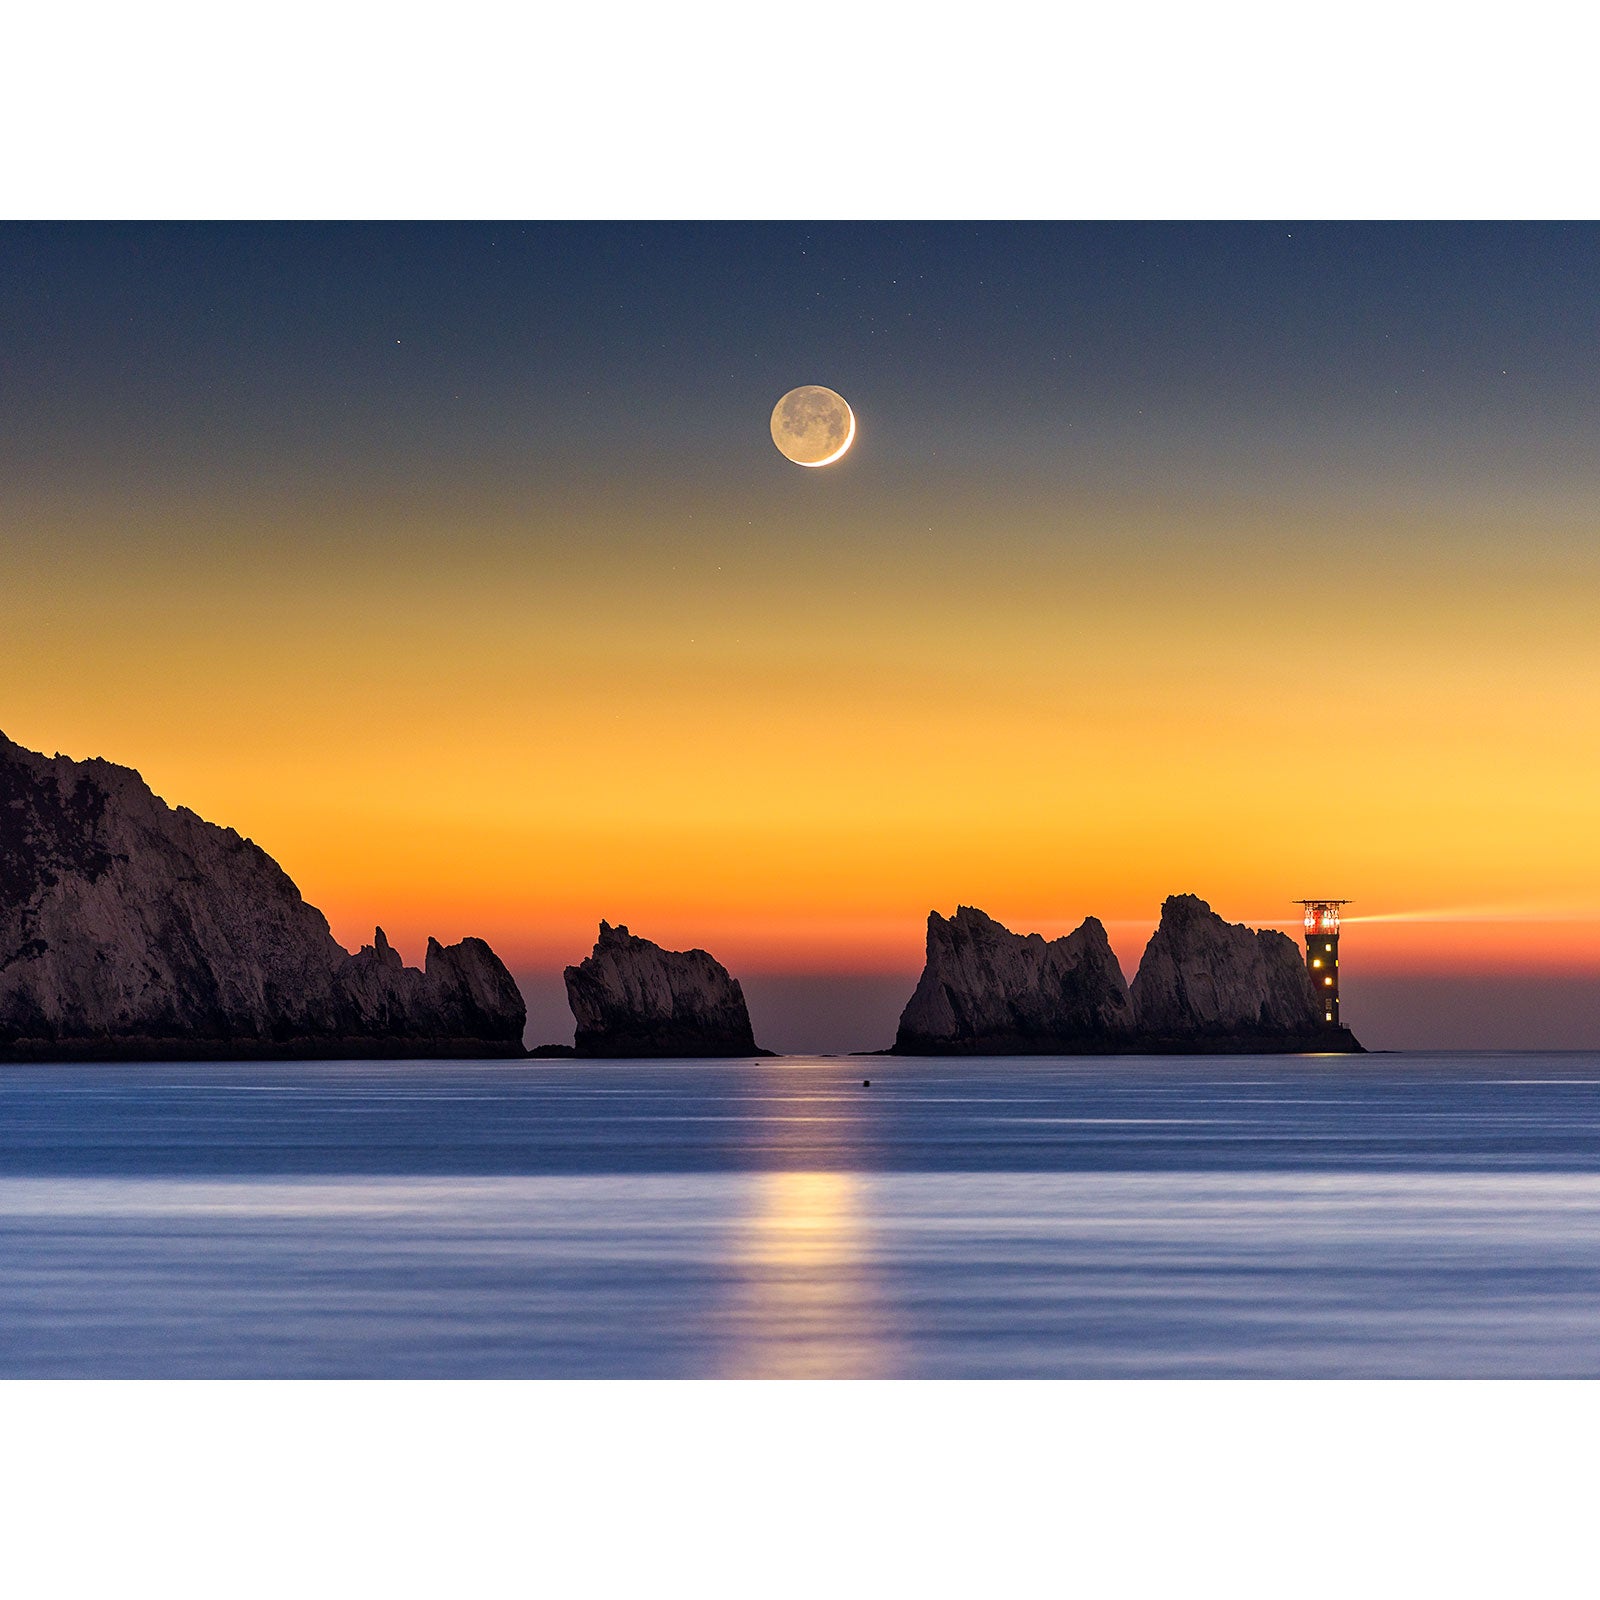 A serene seascape at twilight with a Crescent Moon above rocky cliffs on the Isle of Wight captured by Available Light Photography's Crescent Moon - The Needles.